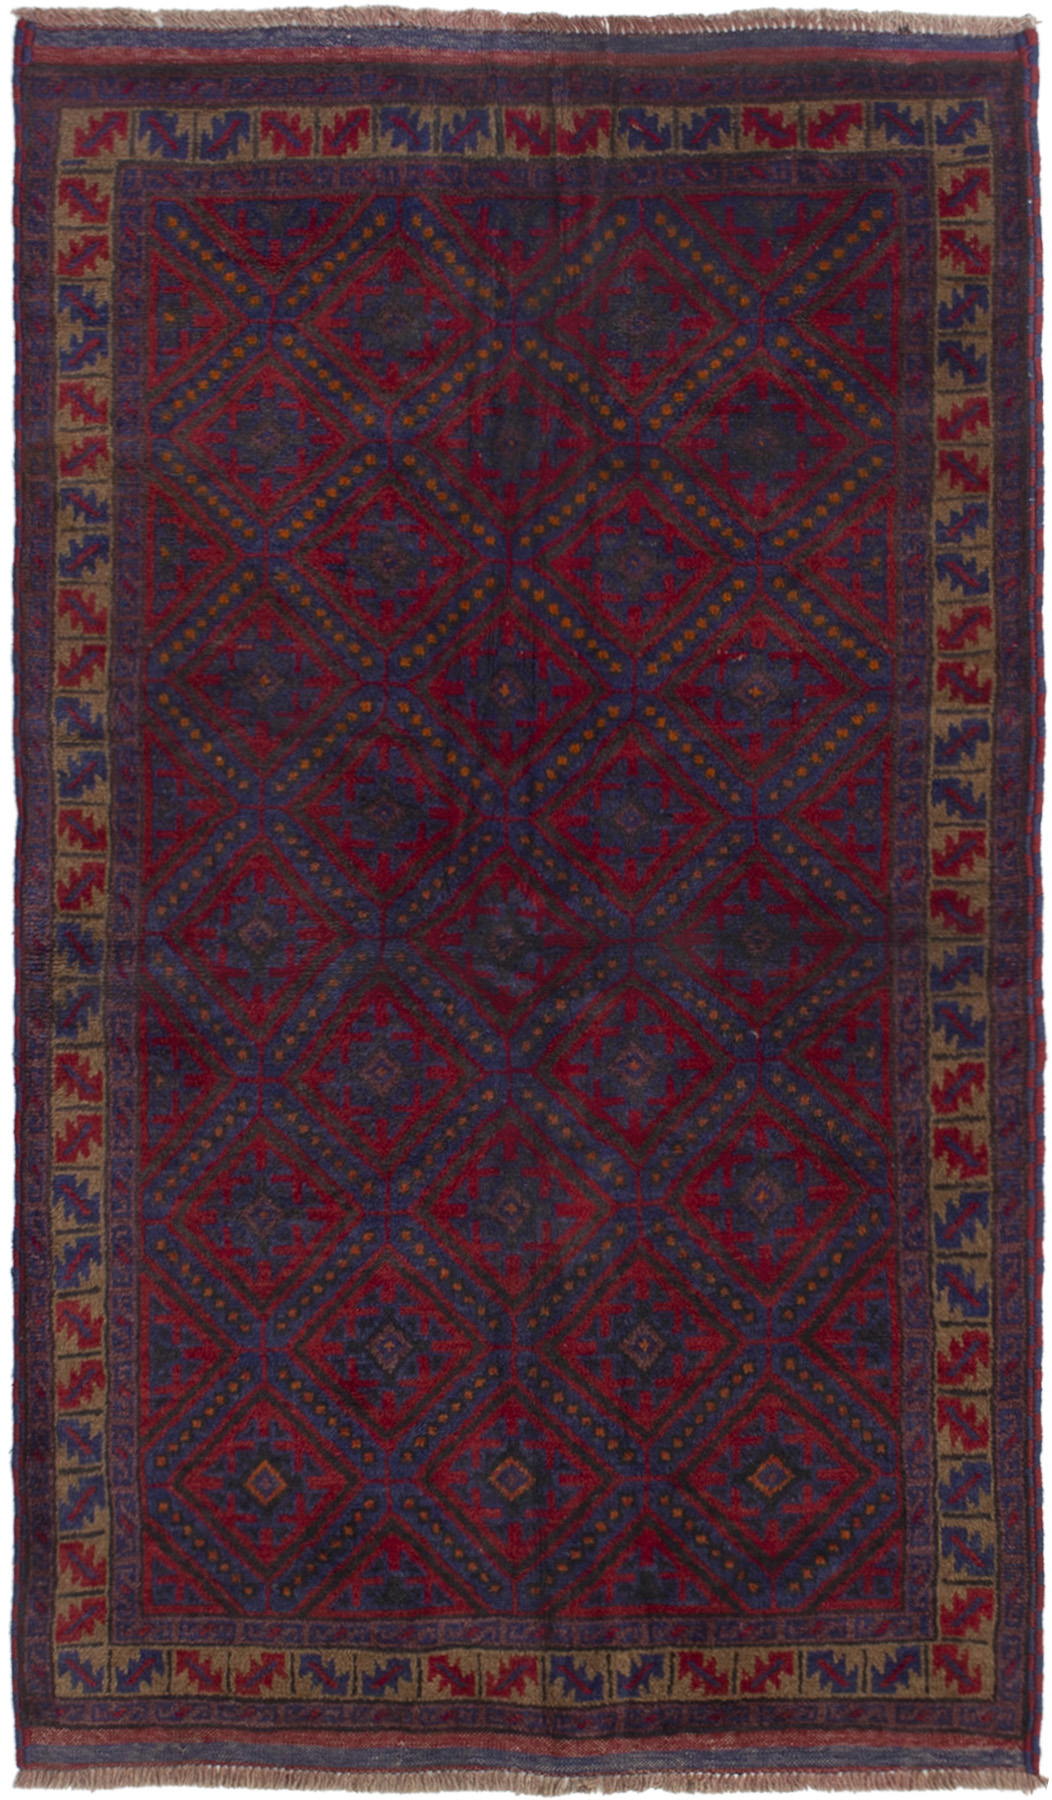 Hand-knotted Rizbaft Red Wool Rug 3'6" x 5'9"  Size: 3'6" x 5'9"  